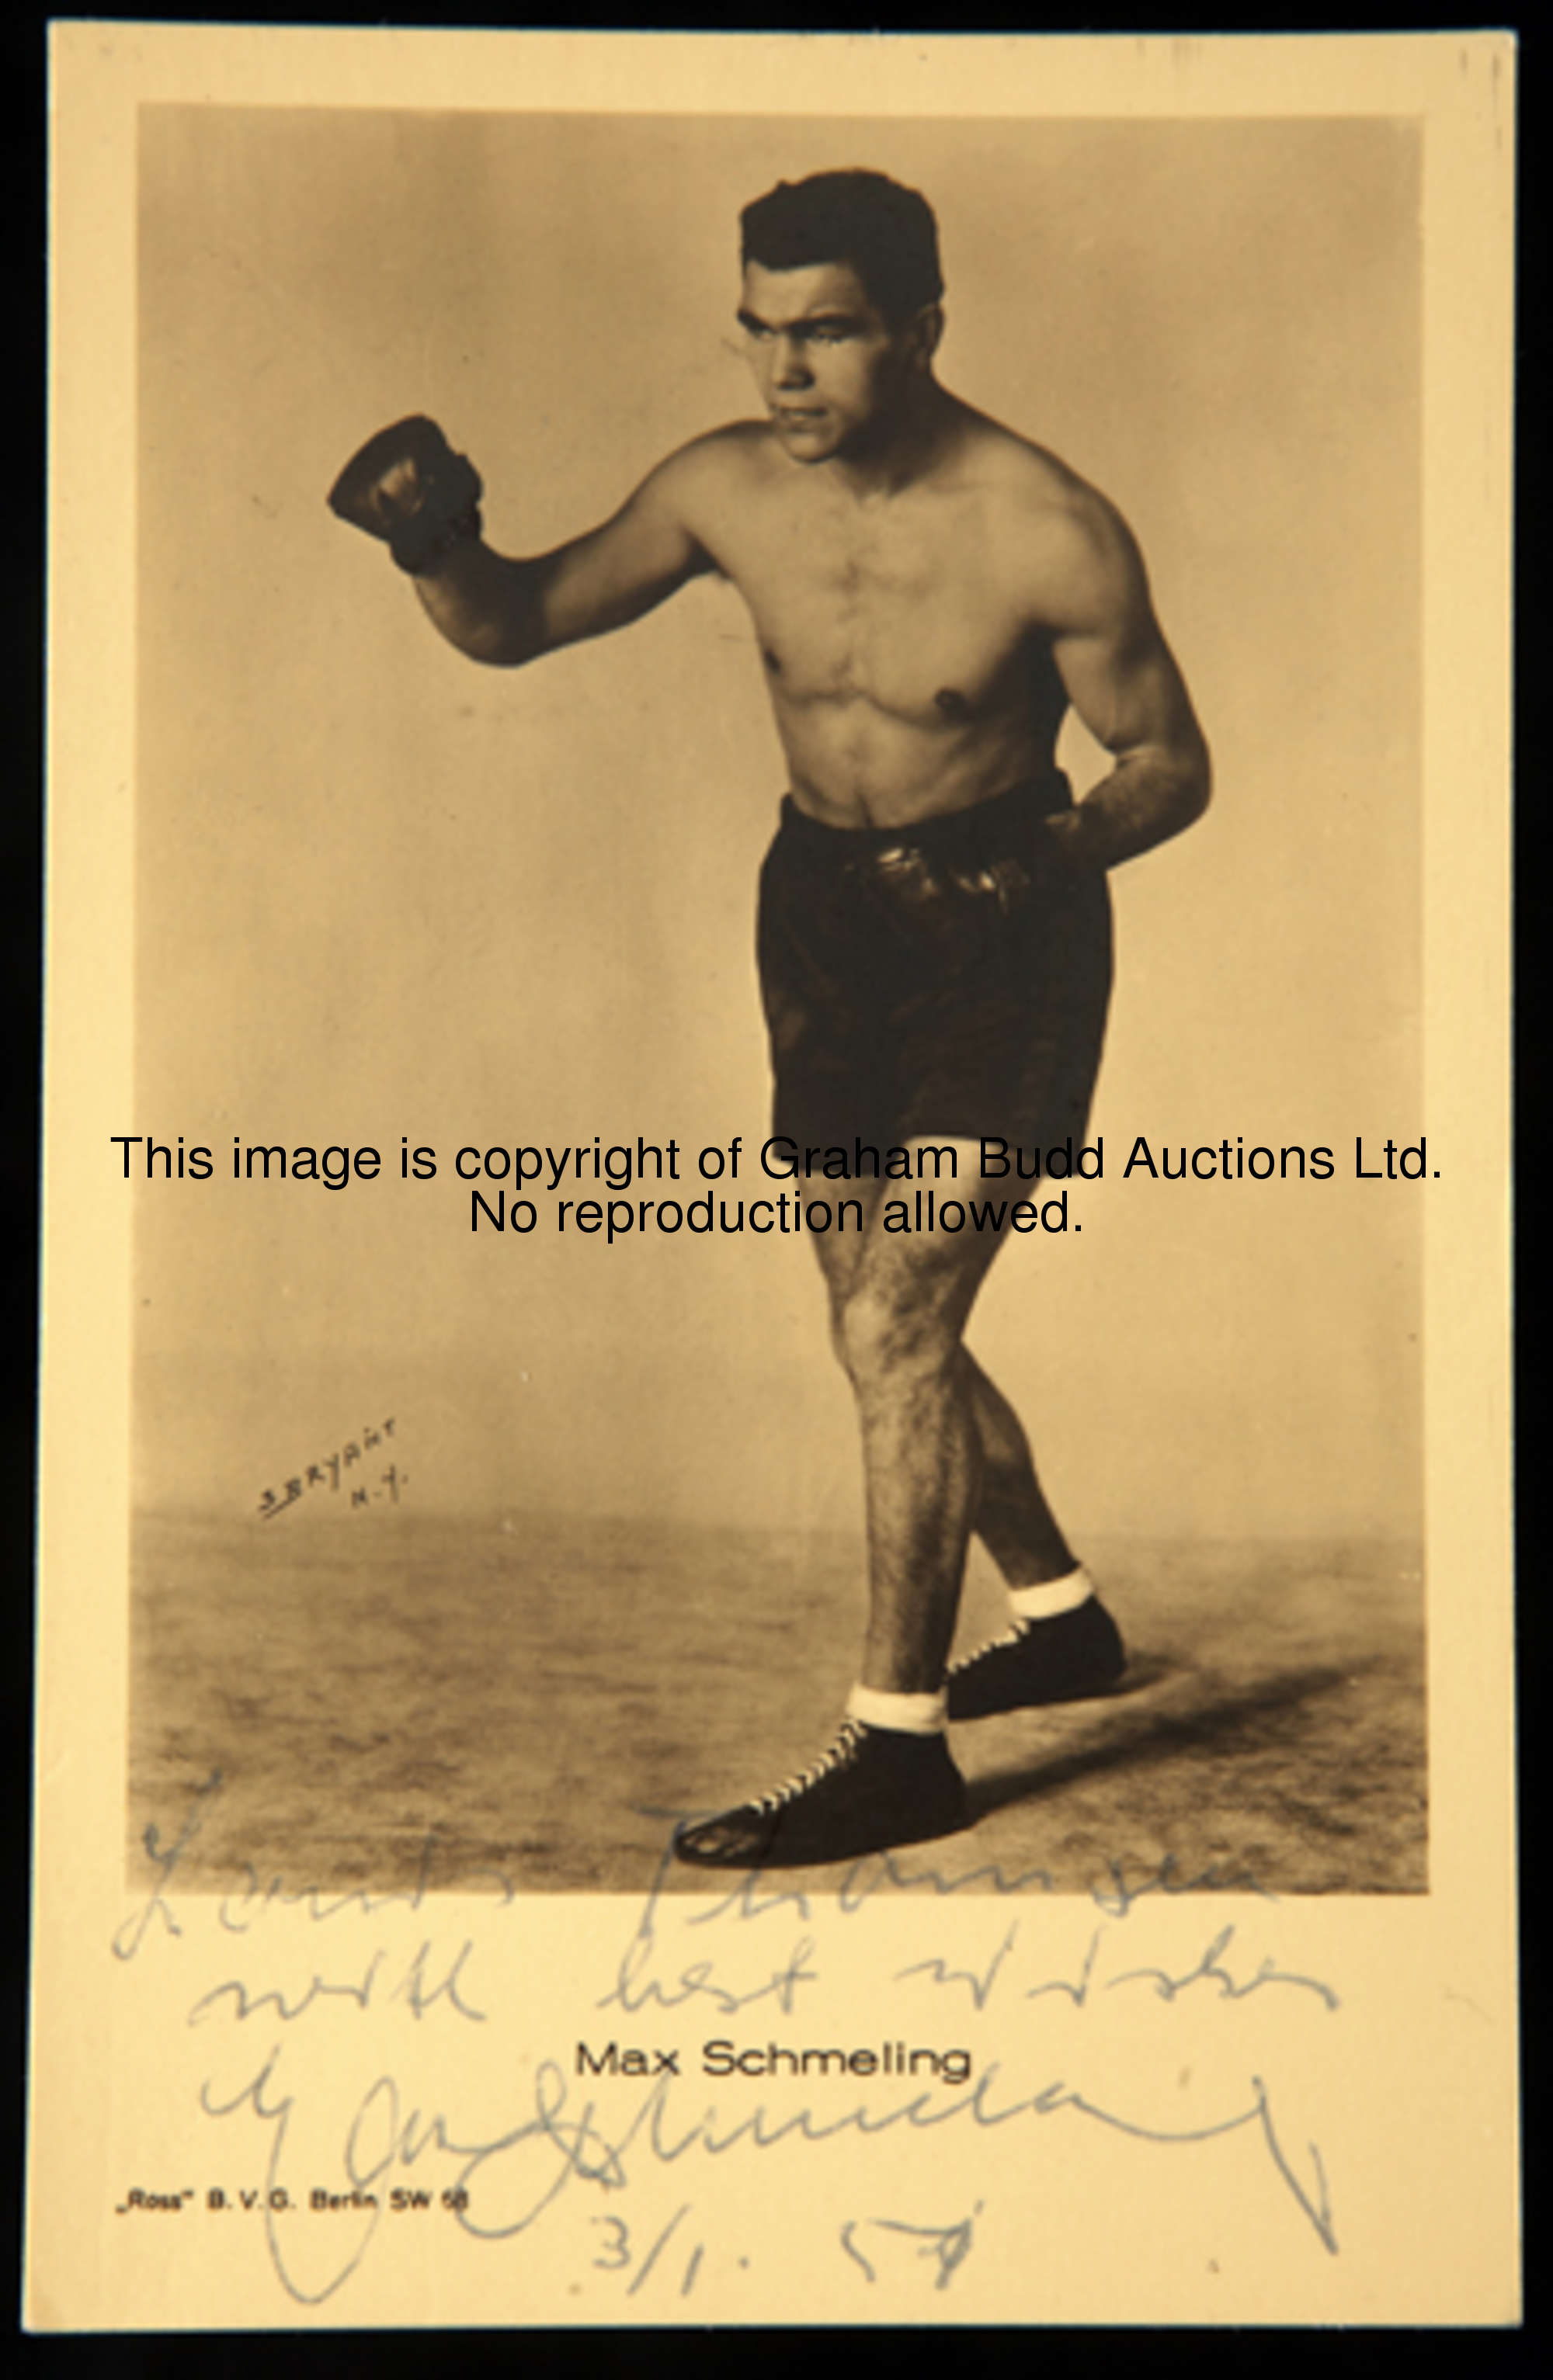 A portrait postcard signed by Max Schmeling the German World Heavyweight Boxing Champion 1930-32. Se...